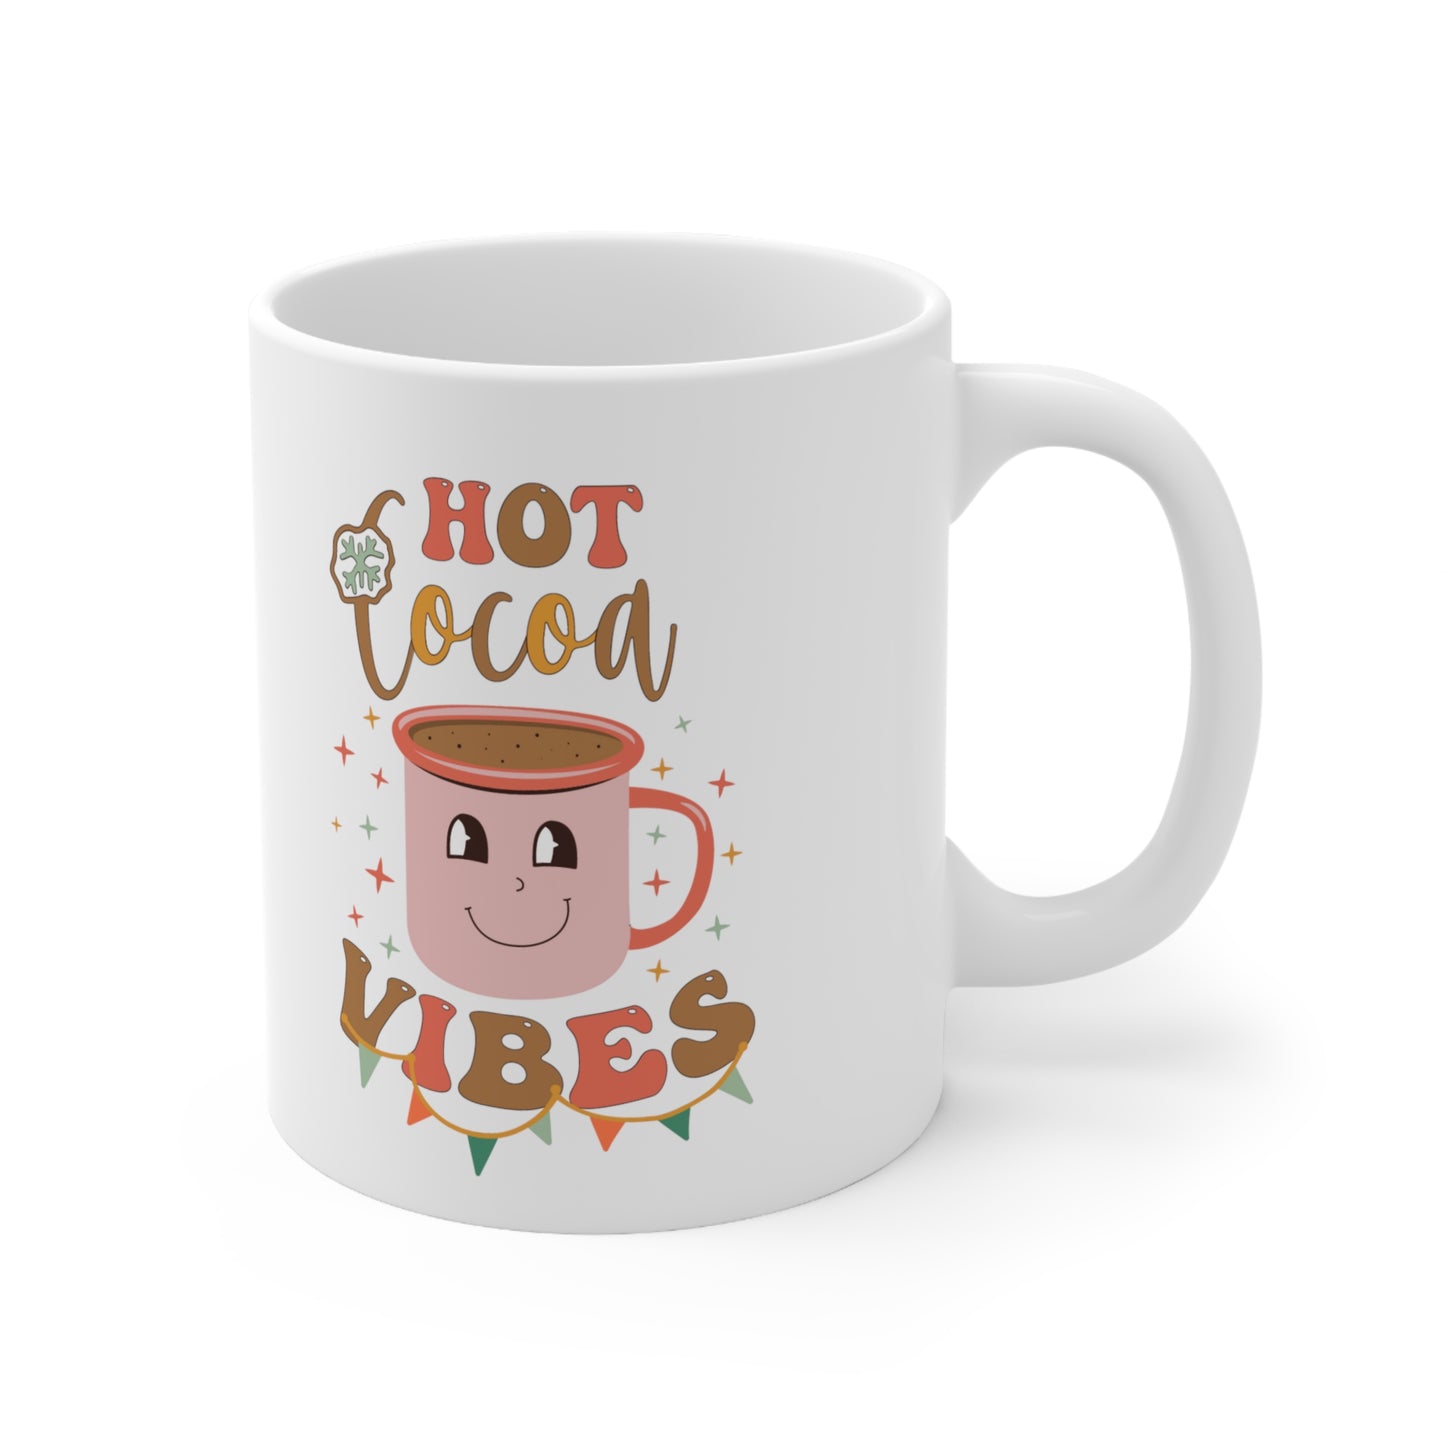 "Coco Bliss: Sipping on Warmth and Happiness"Ceramic Mug 11oz,